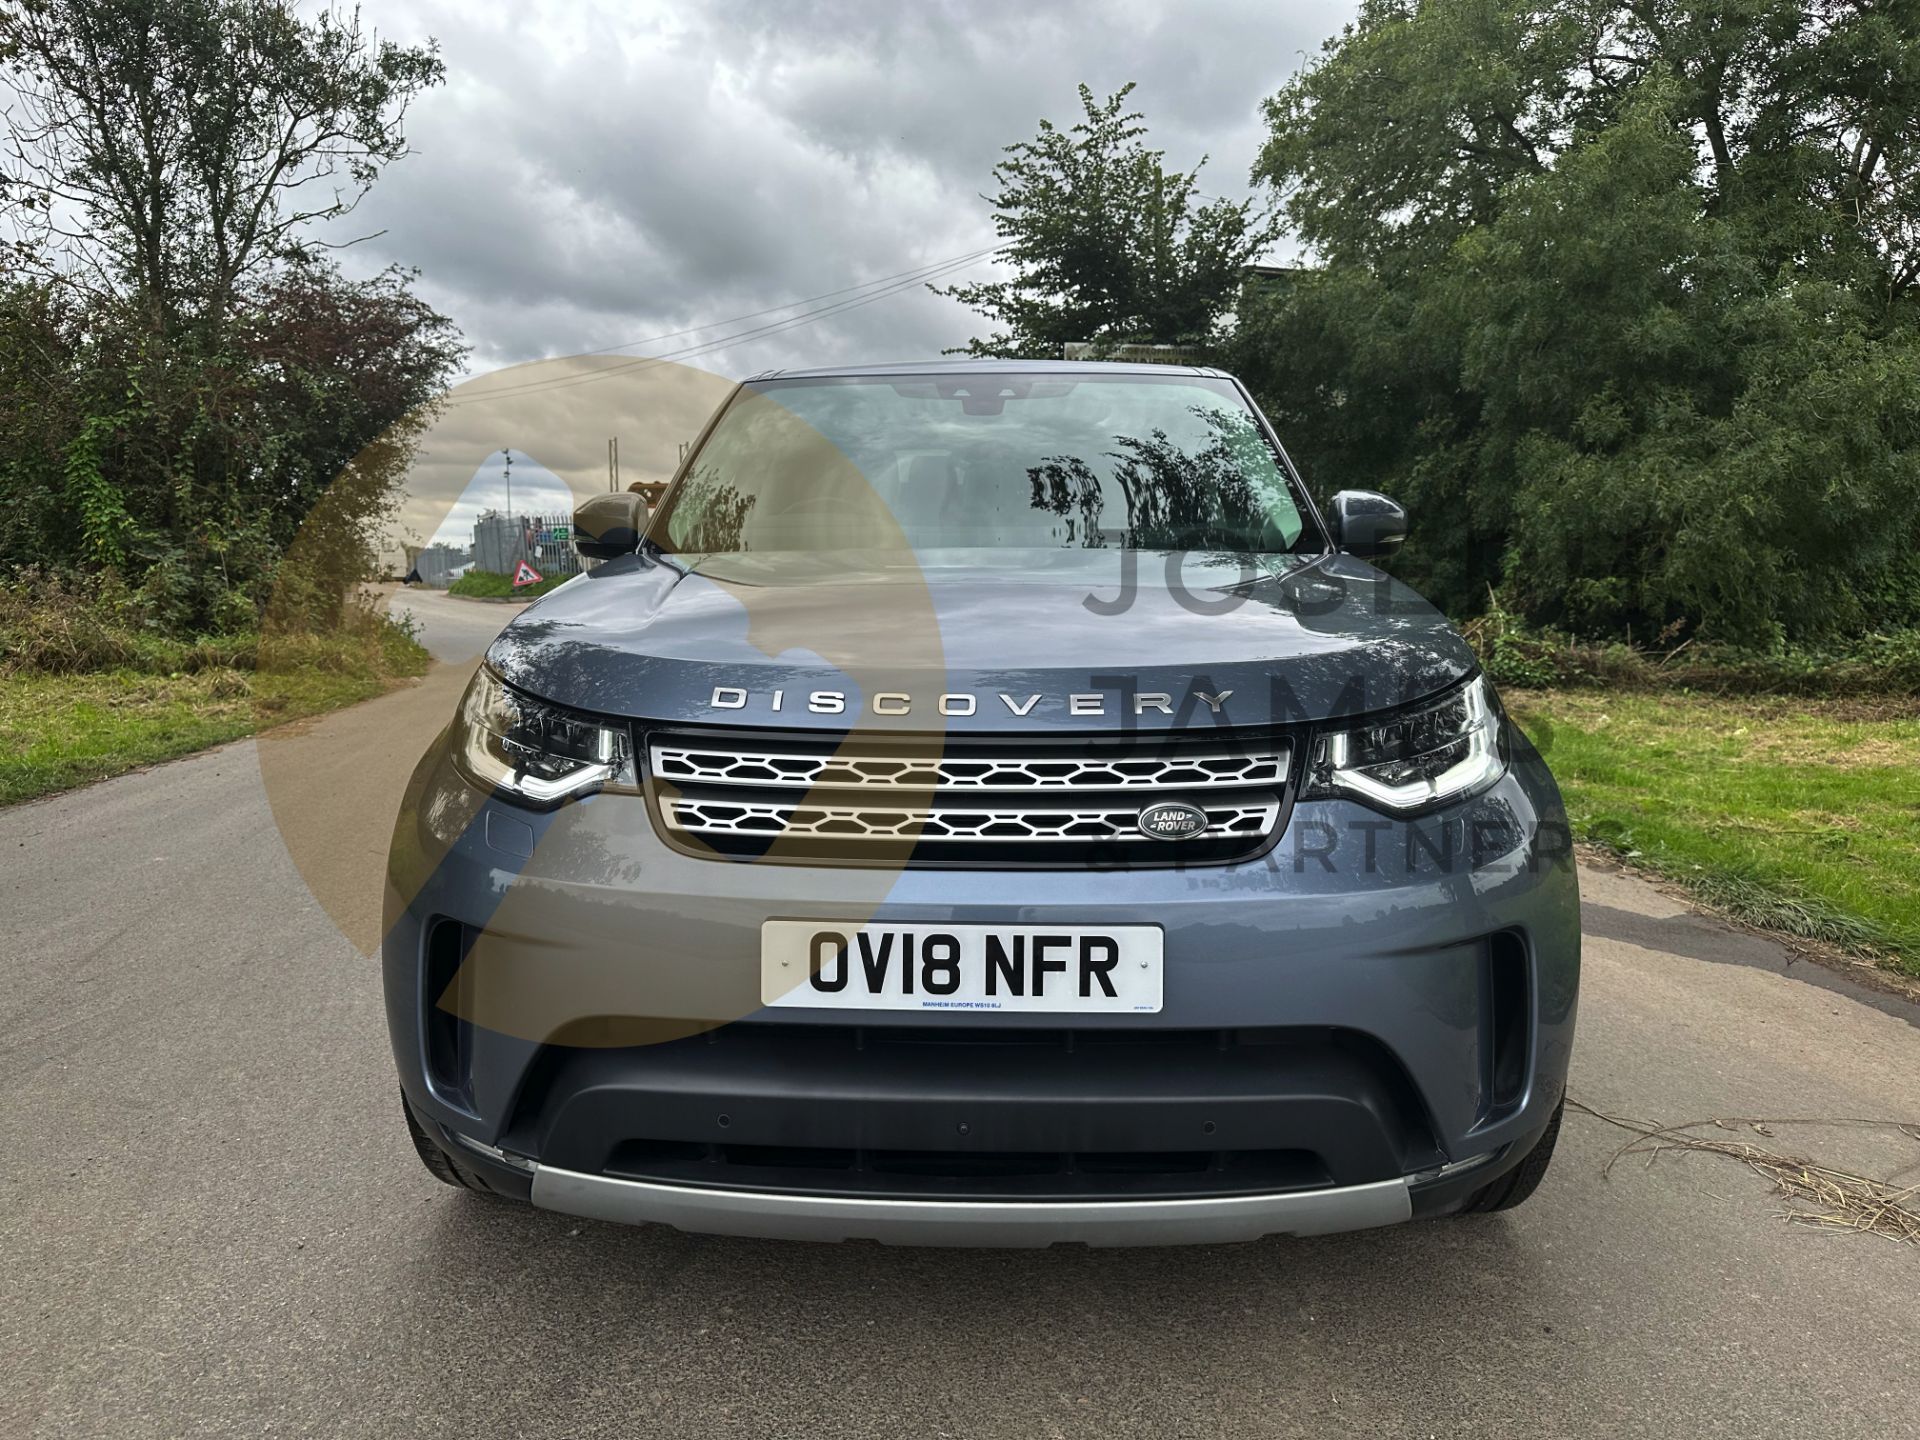 (ON SALE) LAND ROVER DISCOVERY 5 *HSE LUXURY* 7 SEATER SUV (2018 - FACELIFT MODEL) (LOW MILEAGE) - Image 4 of 66